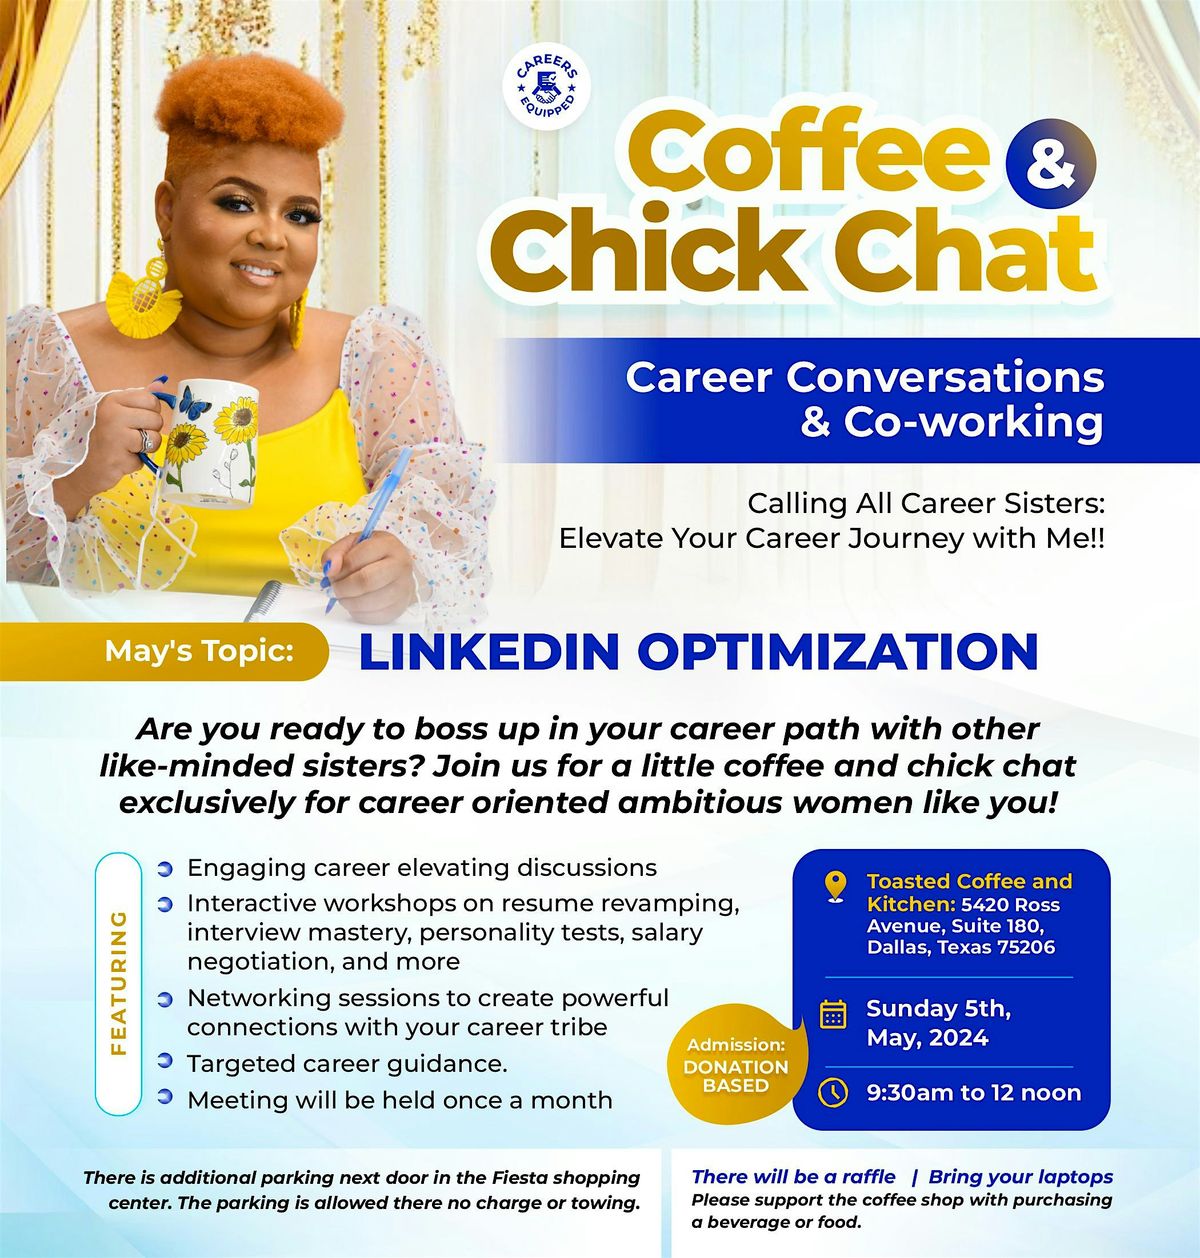 Coffee & Chick Chat : Career Conversations and Coworking